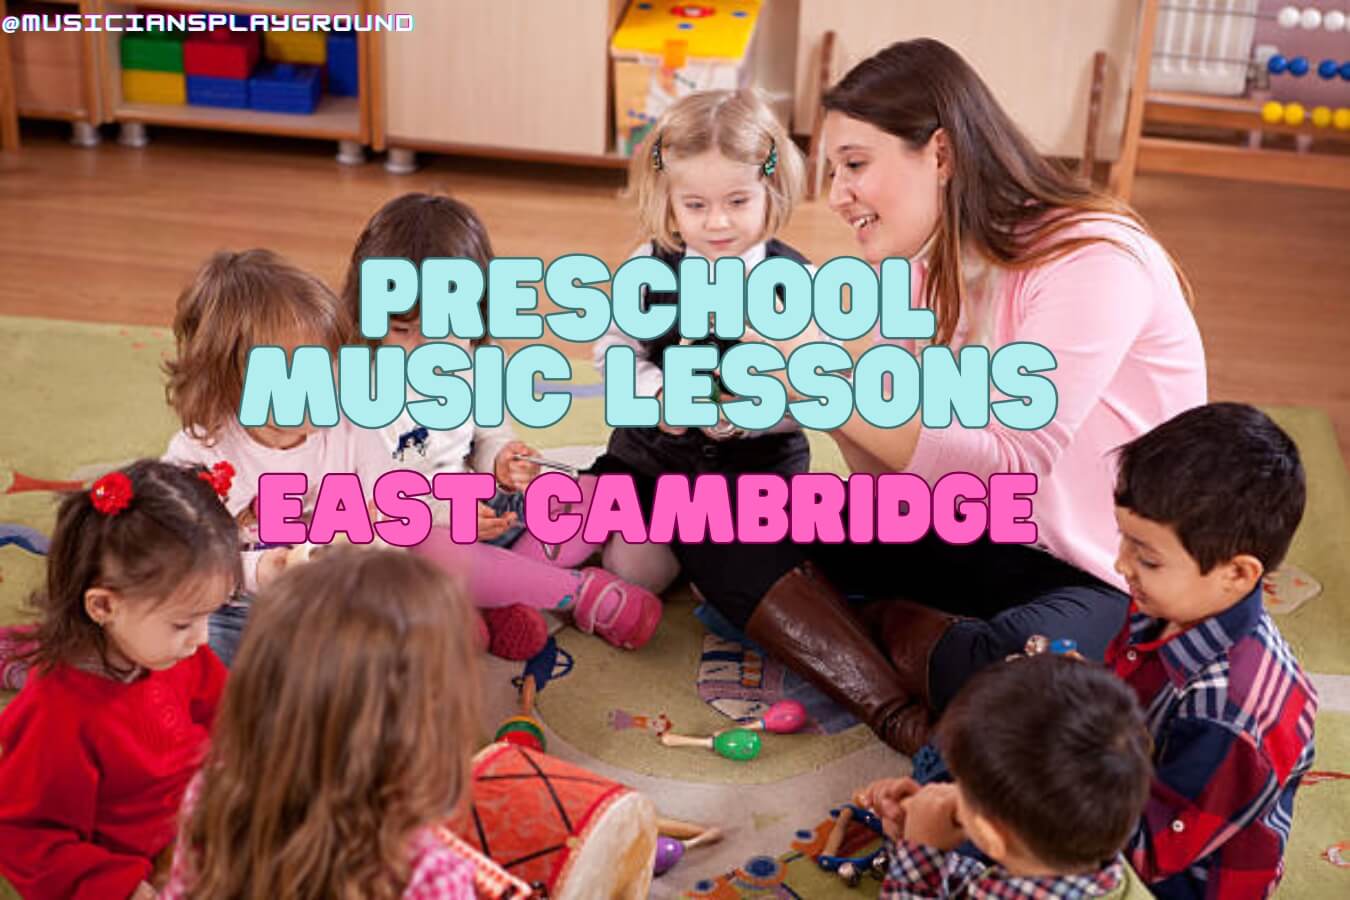 Preschool Music Lessons in East Cambridge, Massachusetts: Ignite Your Child’s Musical Journey at Musicians Playground